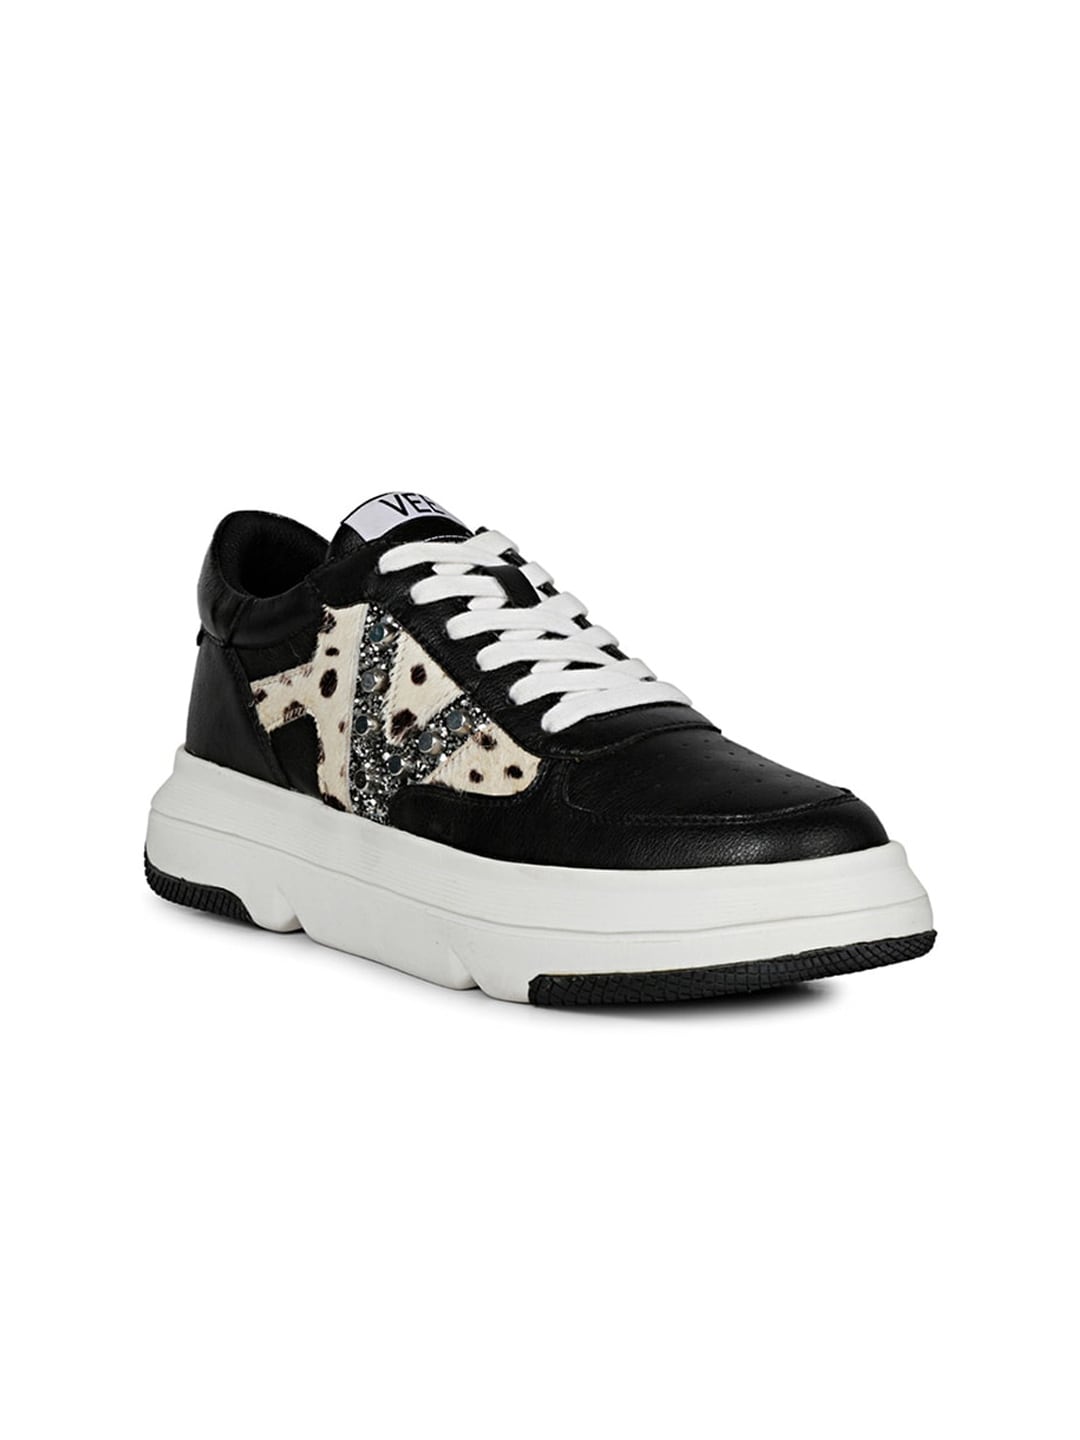 Saint G Women Printed Perforations Embellished Leather Contrast Sole Sneakers Price in India